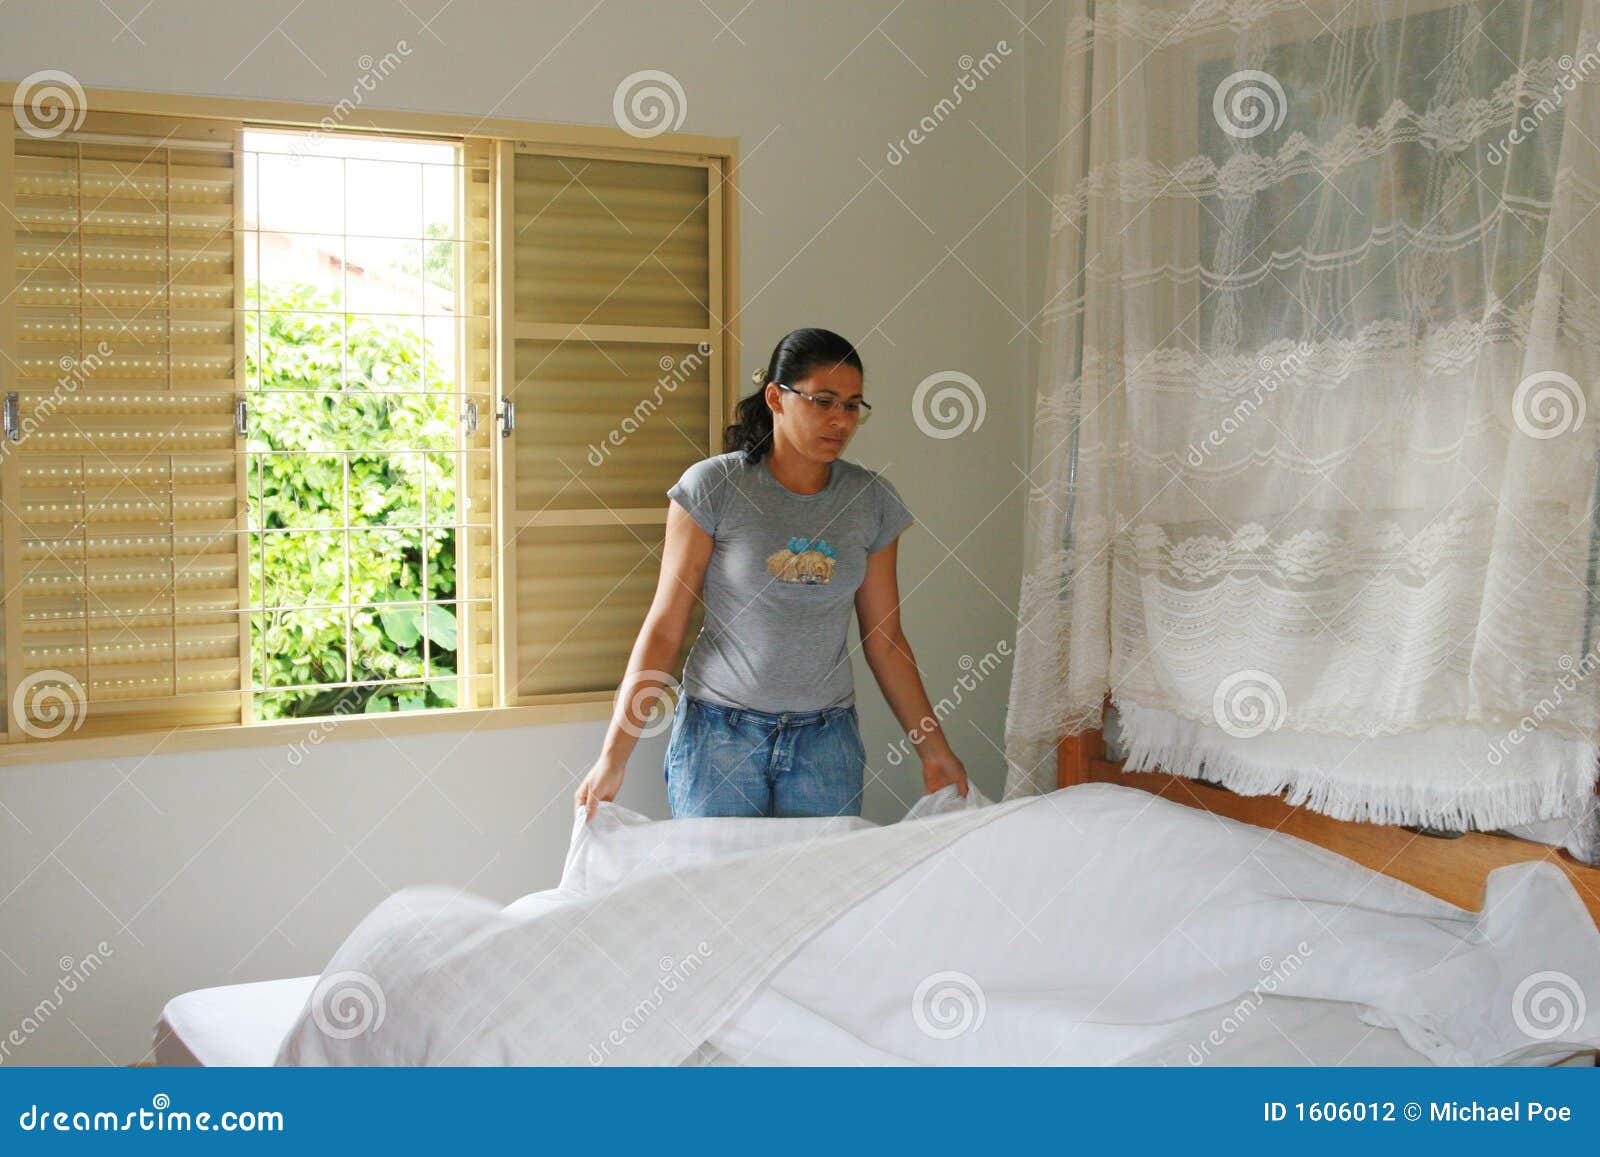 young woman making bed